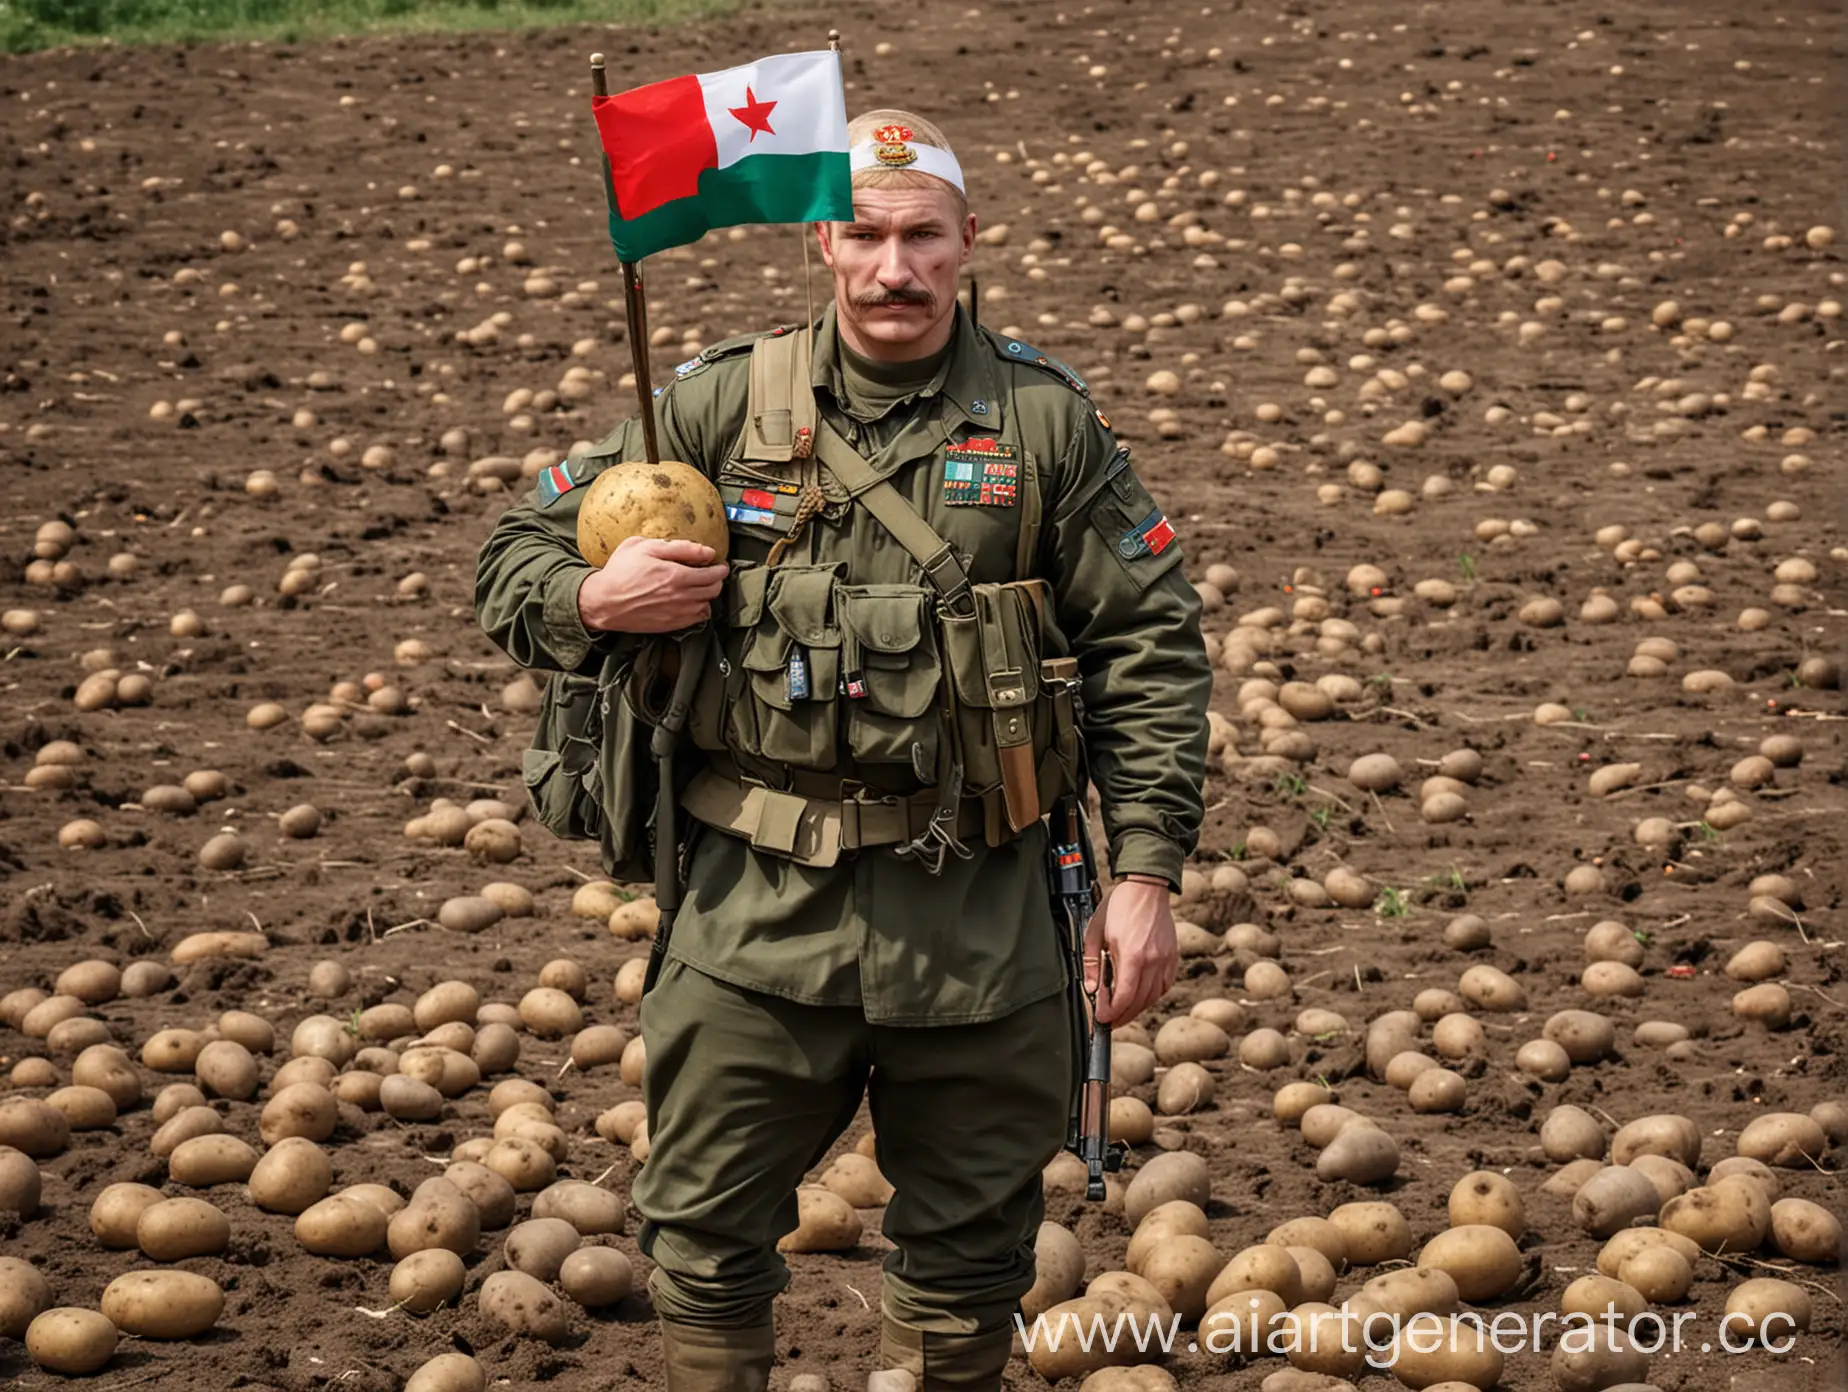 Potato-Rambo-Muscular-Soldier-Potato-with-Russian-and-Belarusian-Flags